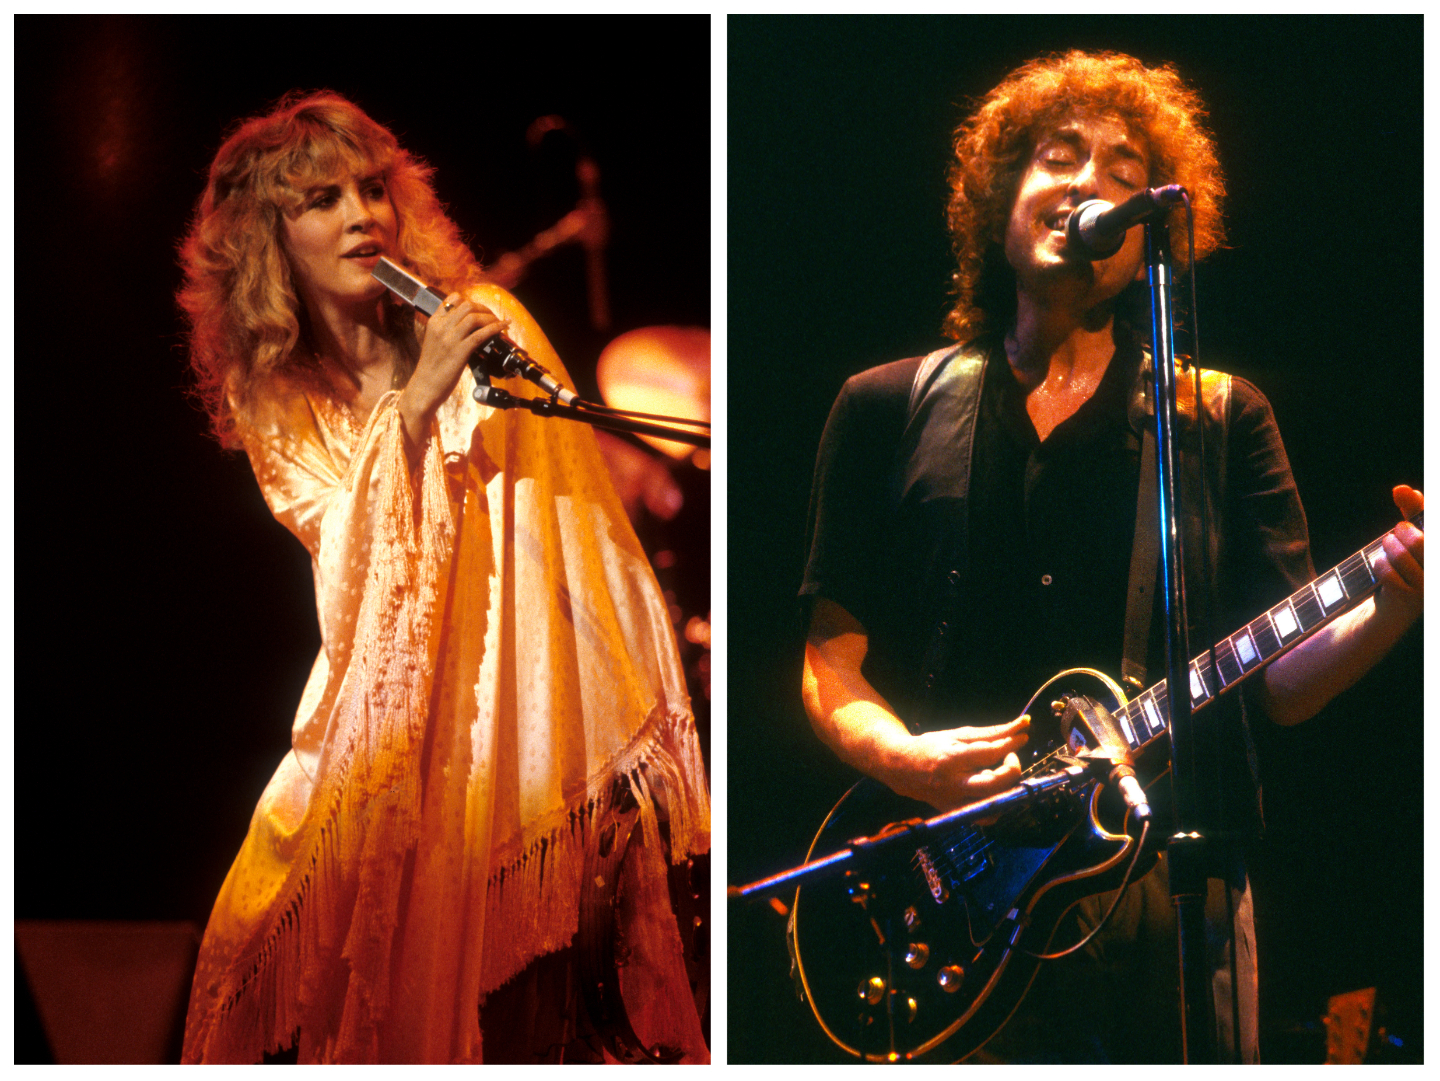 Stevie Nicks wears a shawl and sings into a microphone. Bob Dylan strums a guitar and sings into a microphone.